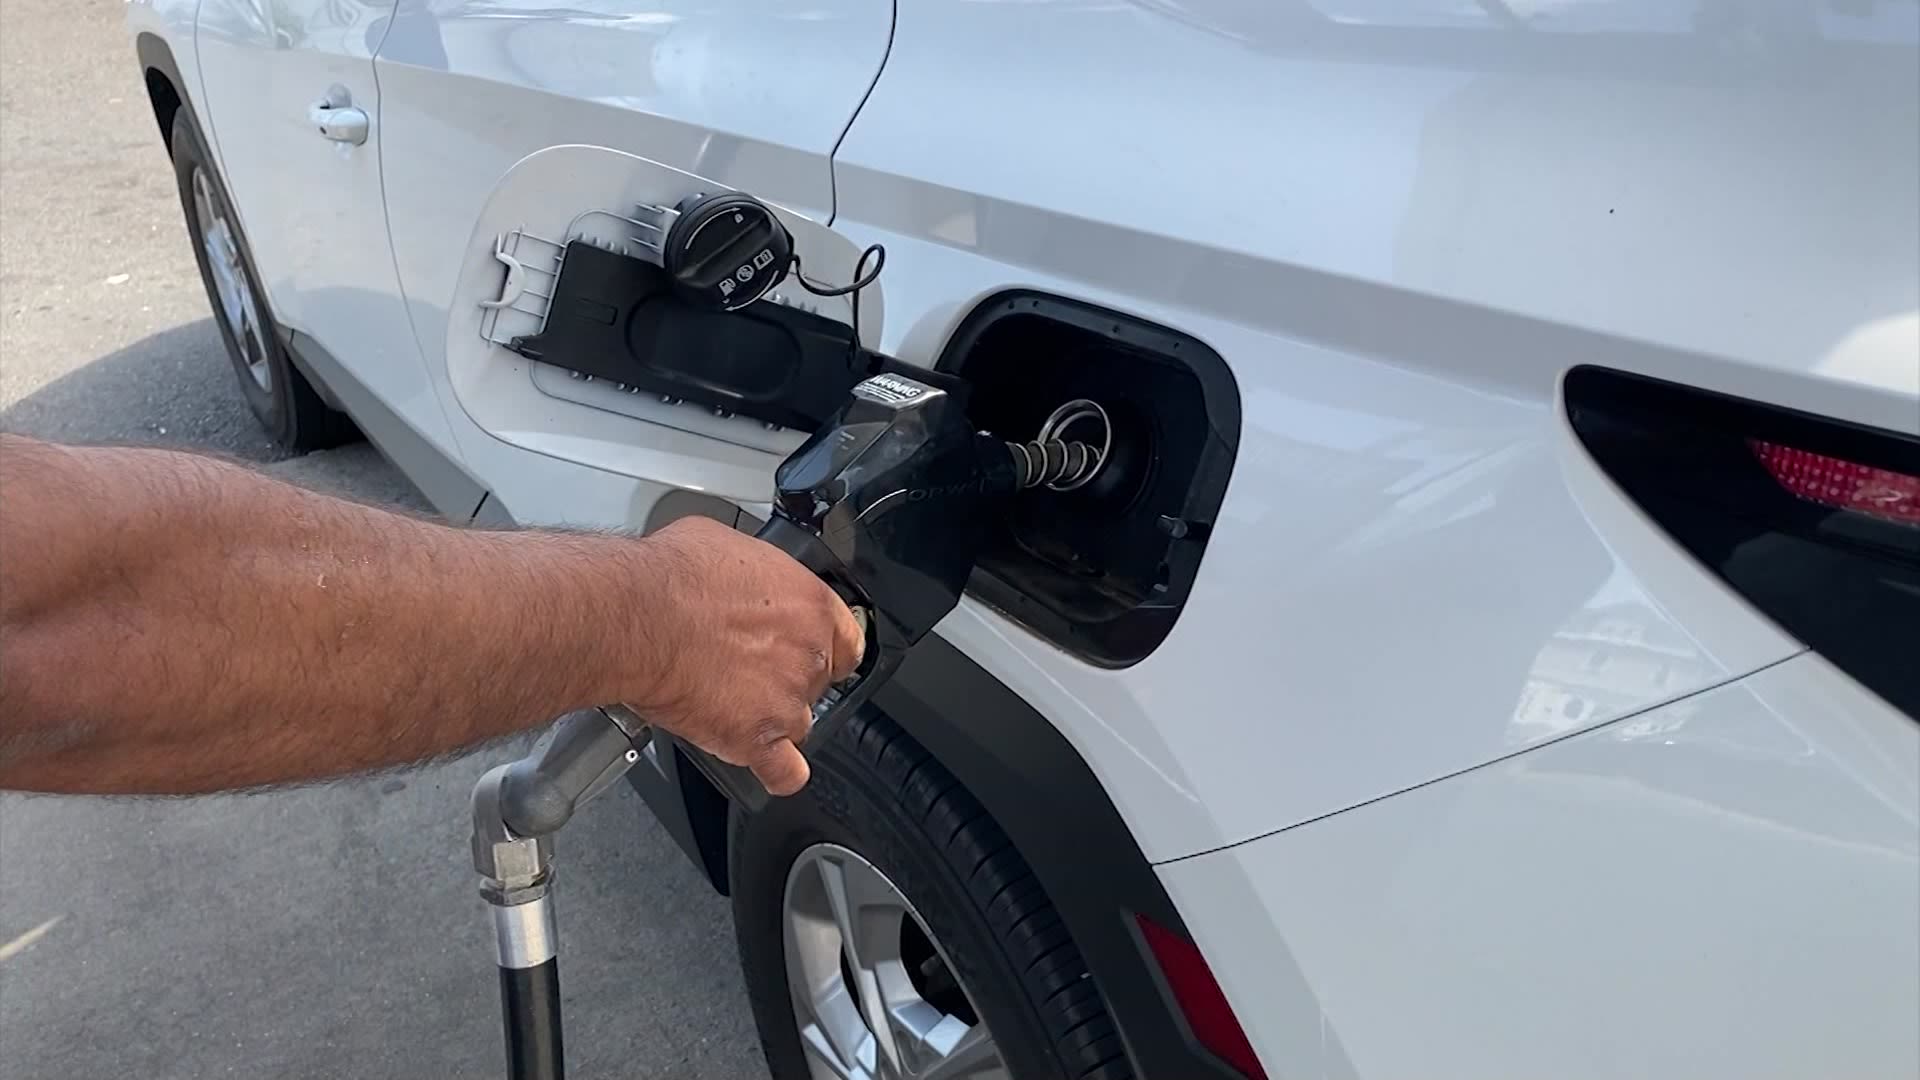 NJ gas tax to increase 1 cent per gallon Oct. 1; some lawmakers call